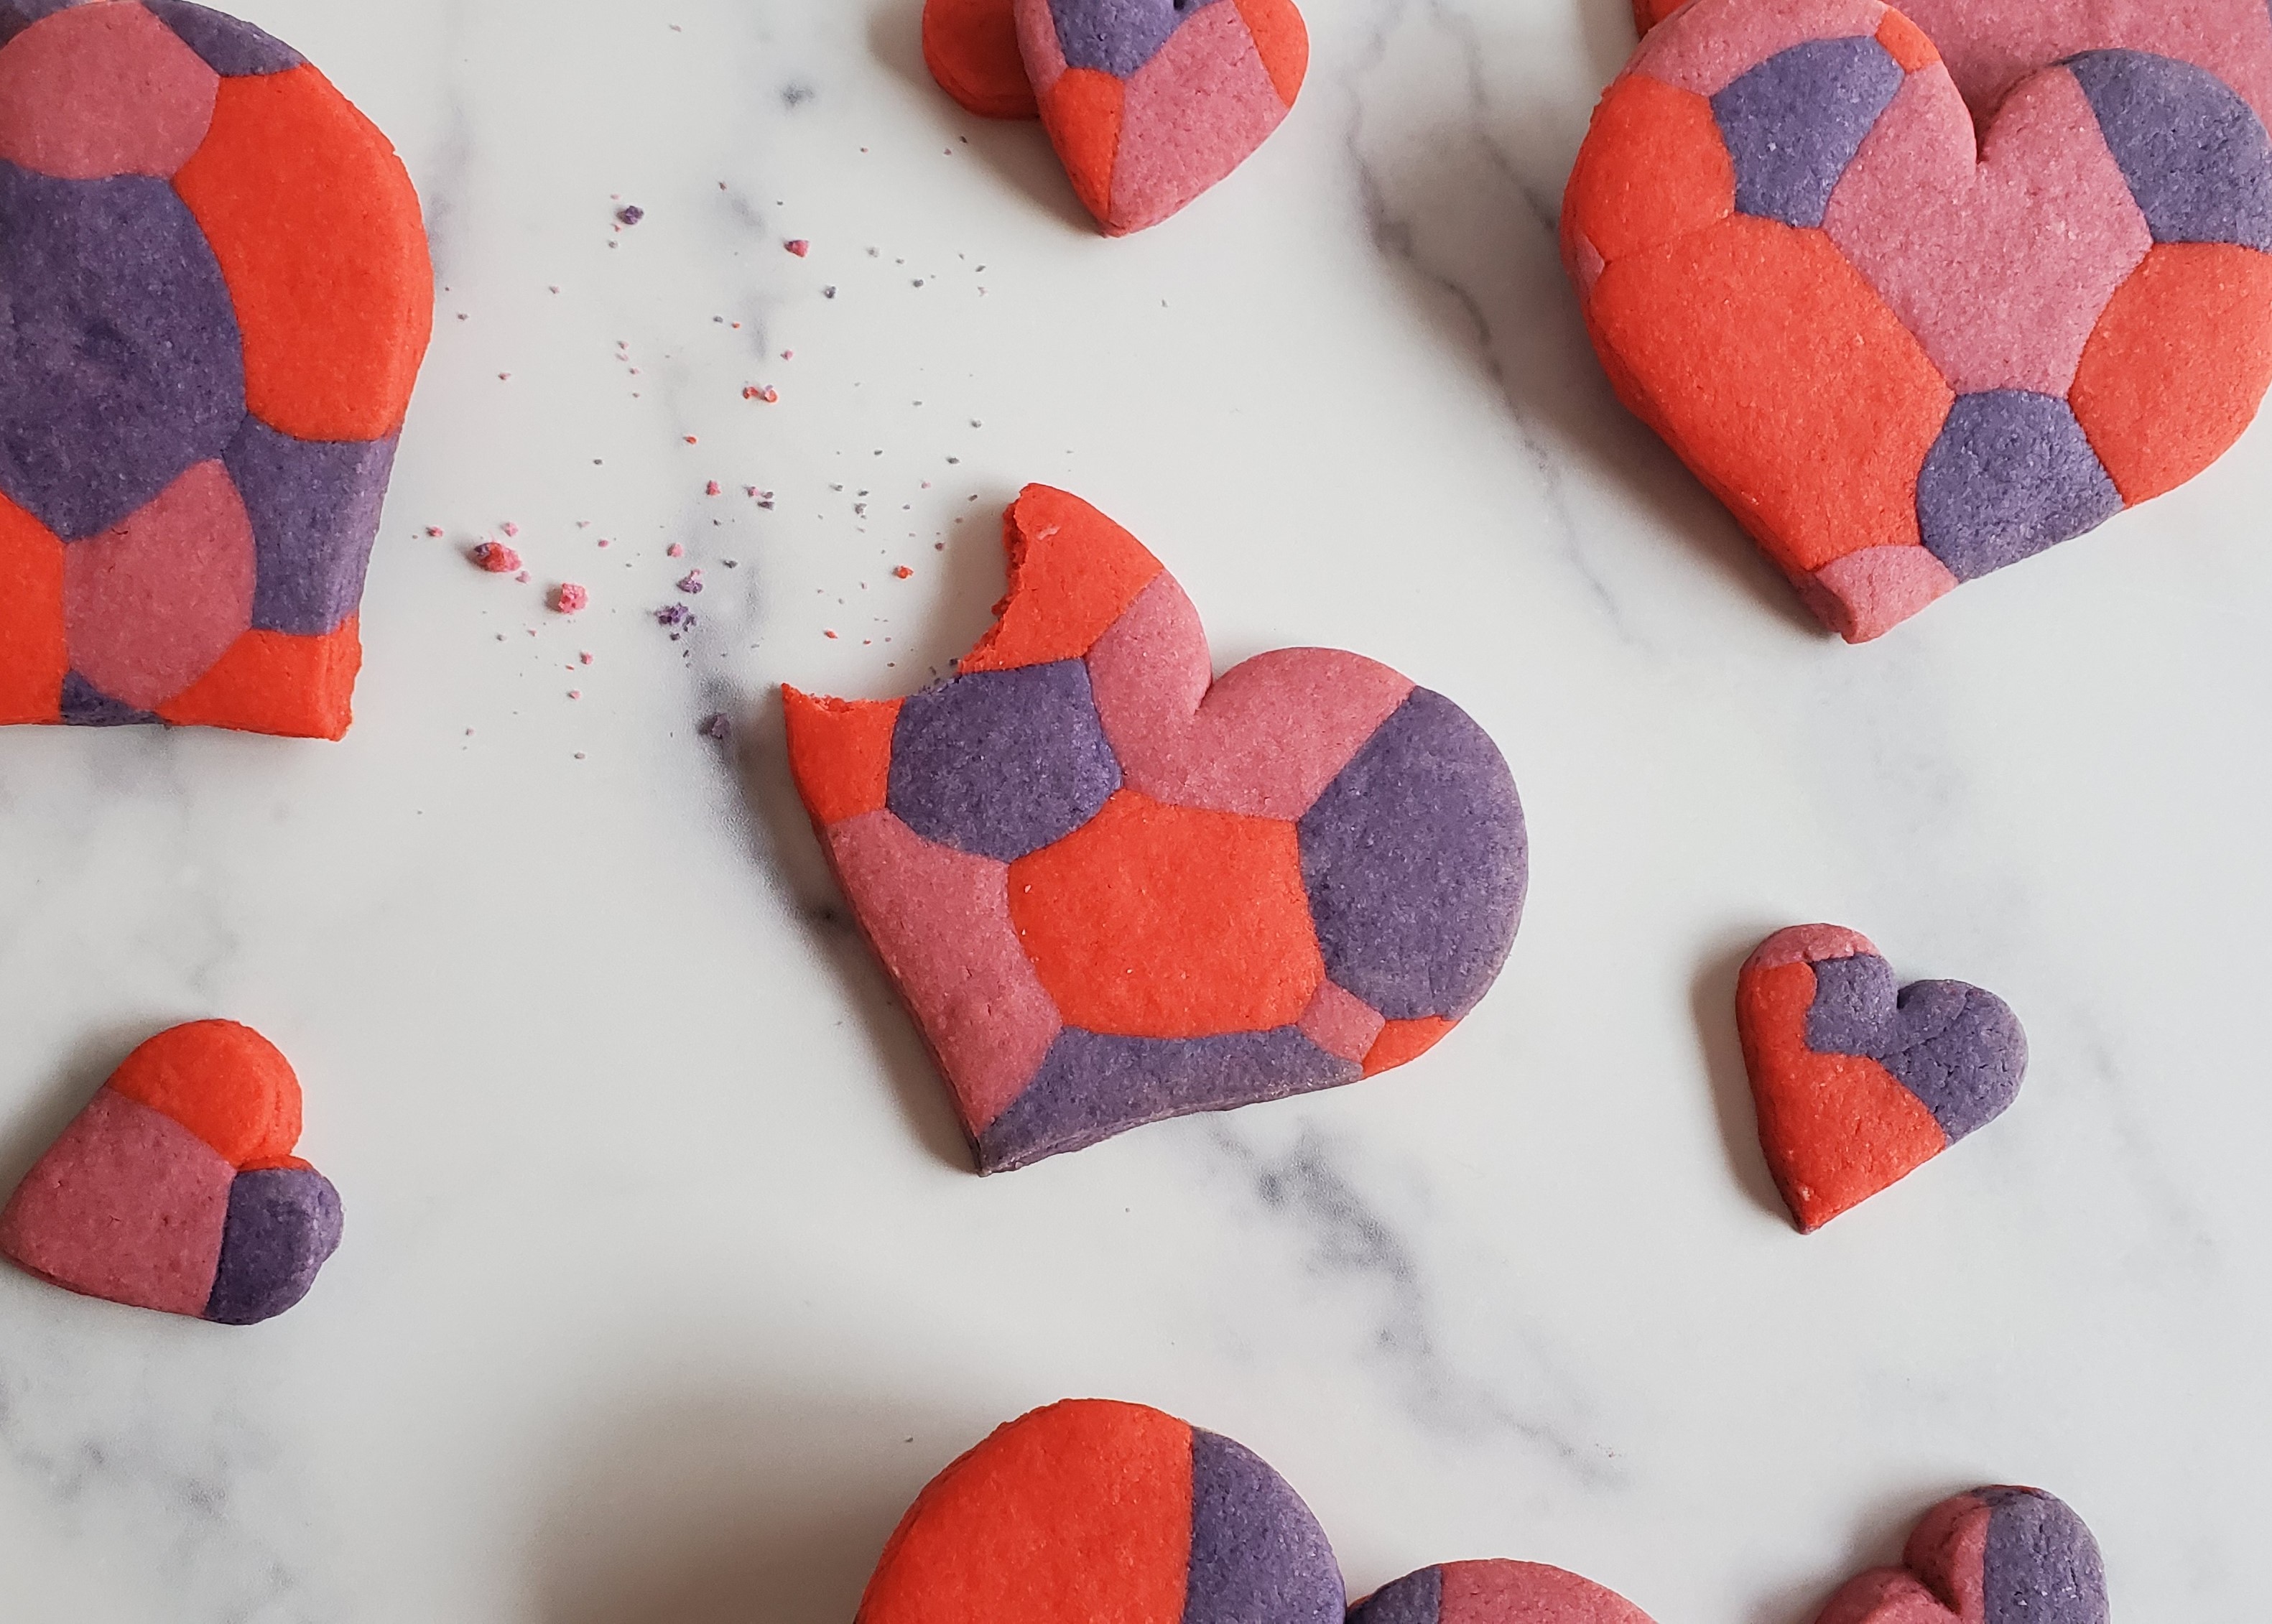 A multi-colored heart shaped cookie in pink red and purple with a big crumby bite out of it, surrounded by similar cookies on a white marble background.